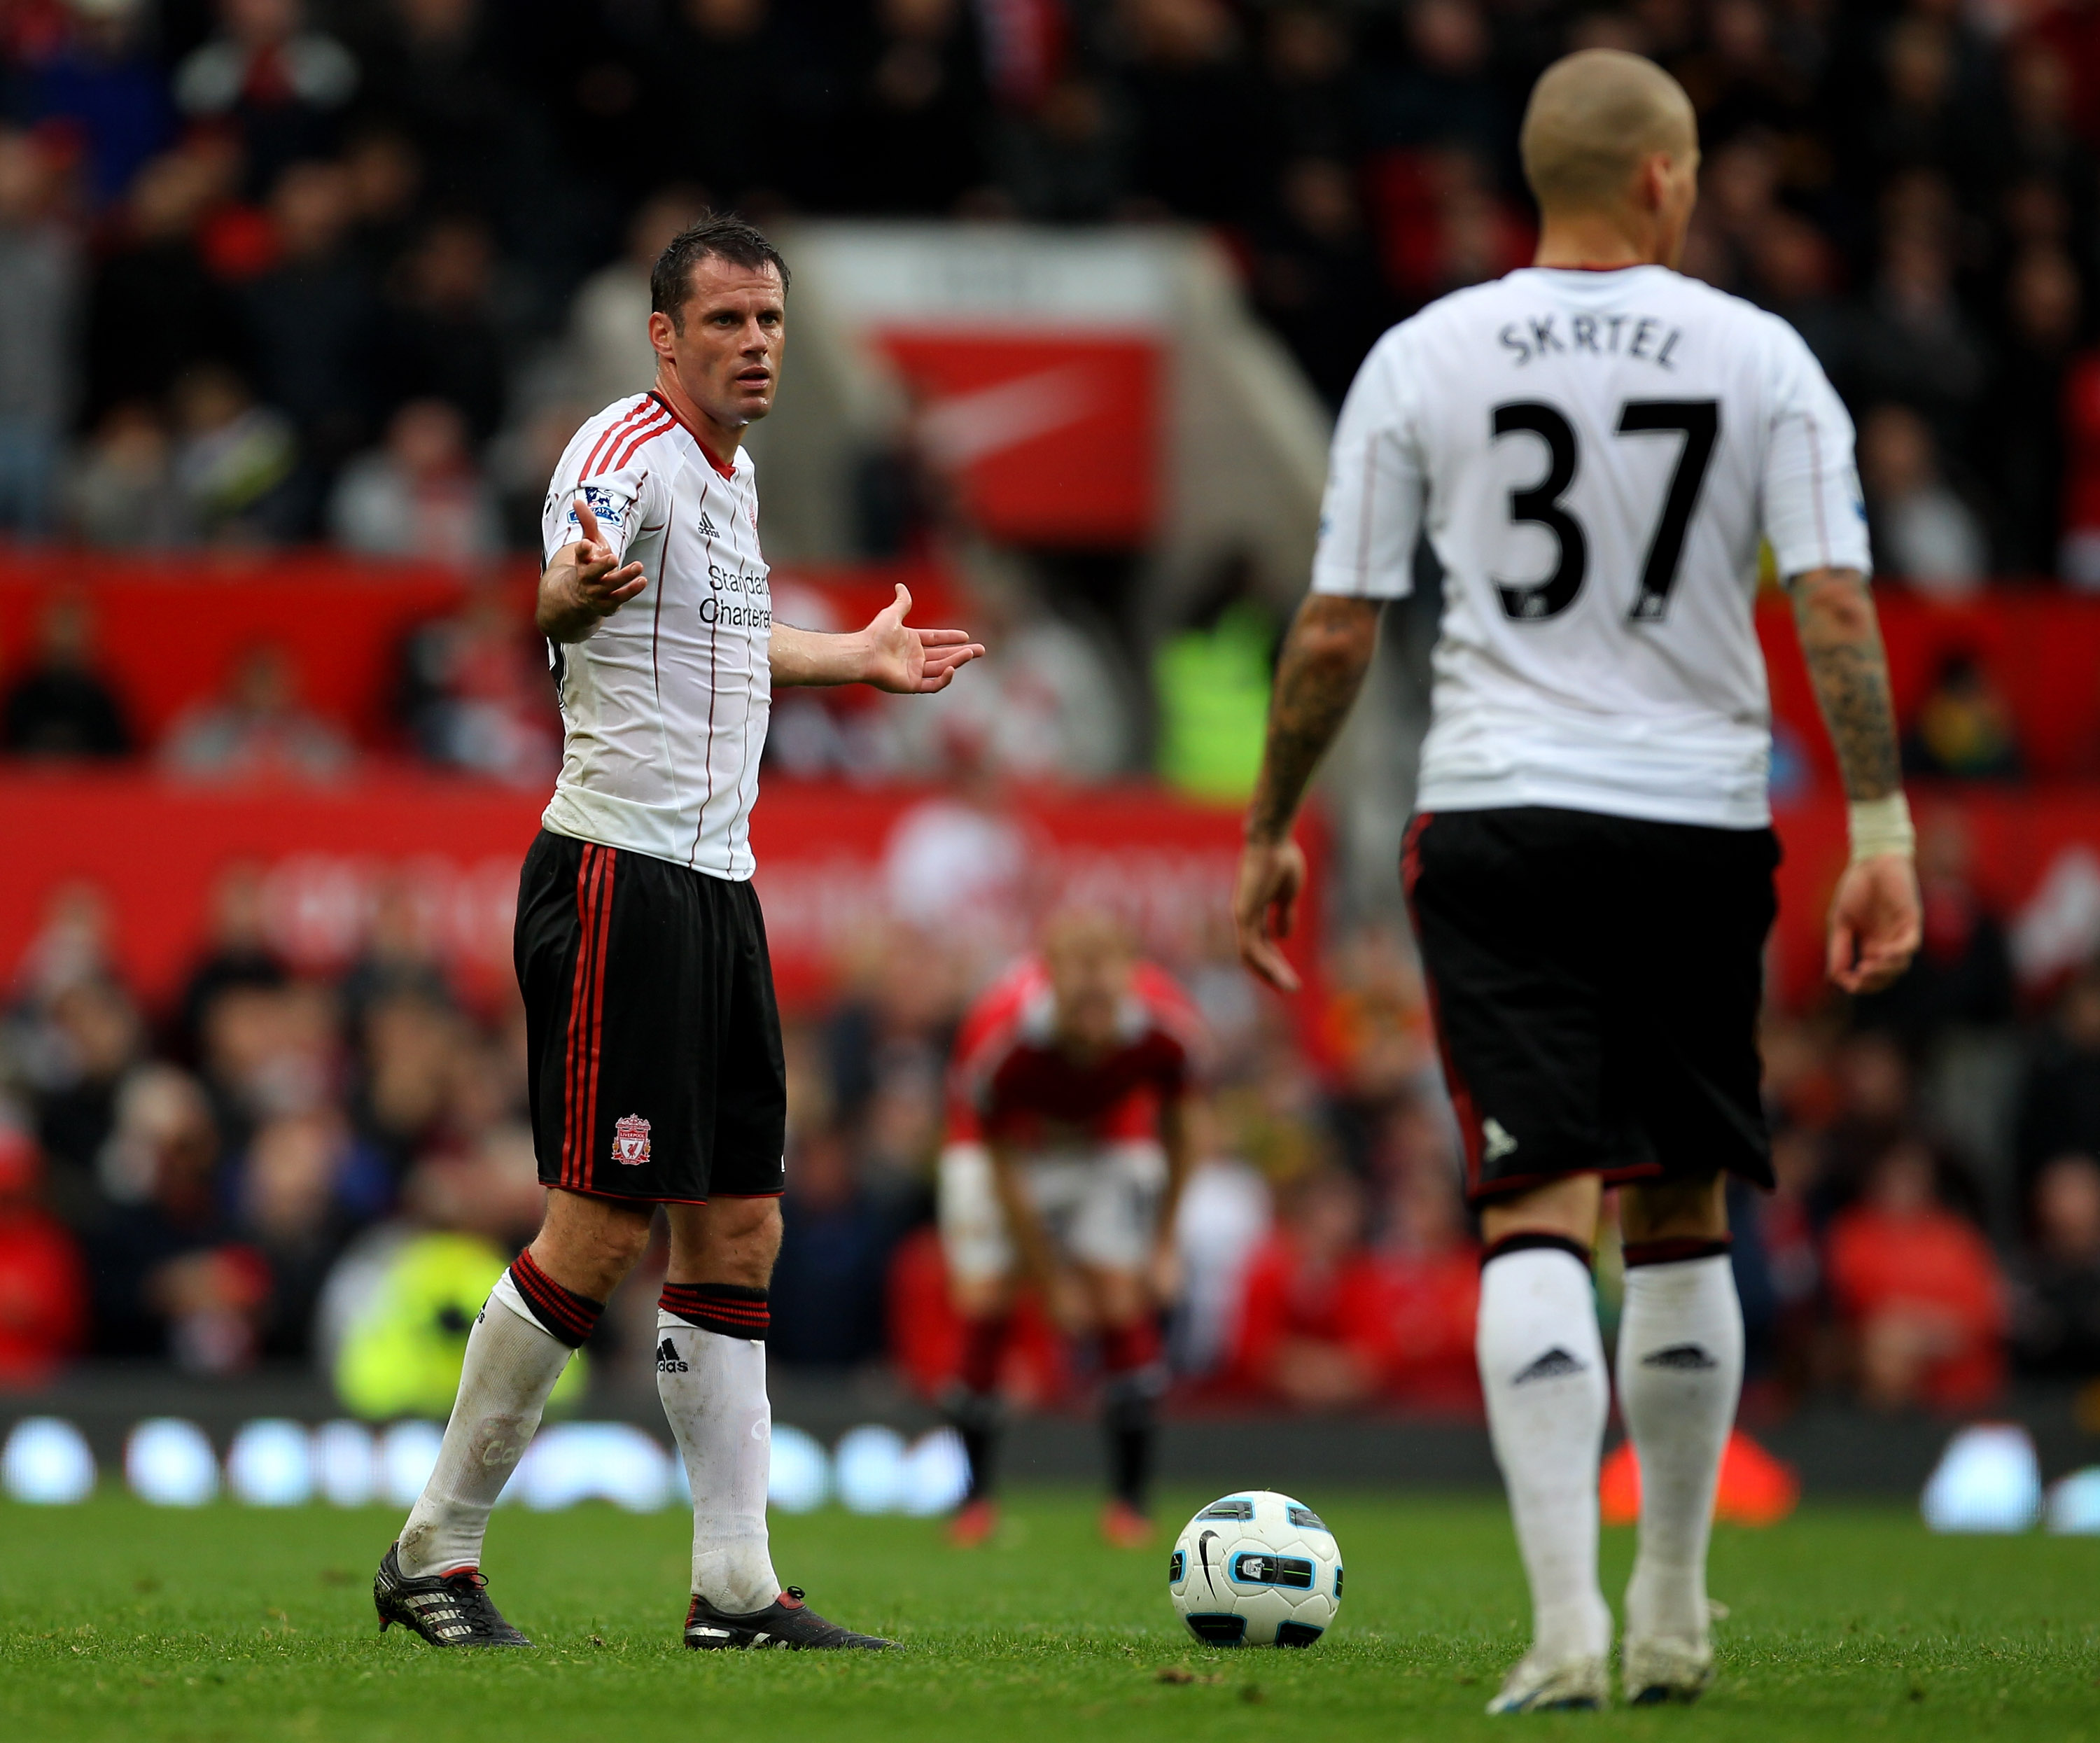 MANCHESTER, ENGLAND - SEPTEMBER 19:  Jamie Carragher of Liverpool gestures during the Barclays Premier League match between Manchester United and Liverpool at Old Trafford on September 19, 2010 in Manchester, England. (Photo by Alex Livesey/Getty Images)